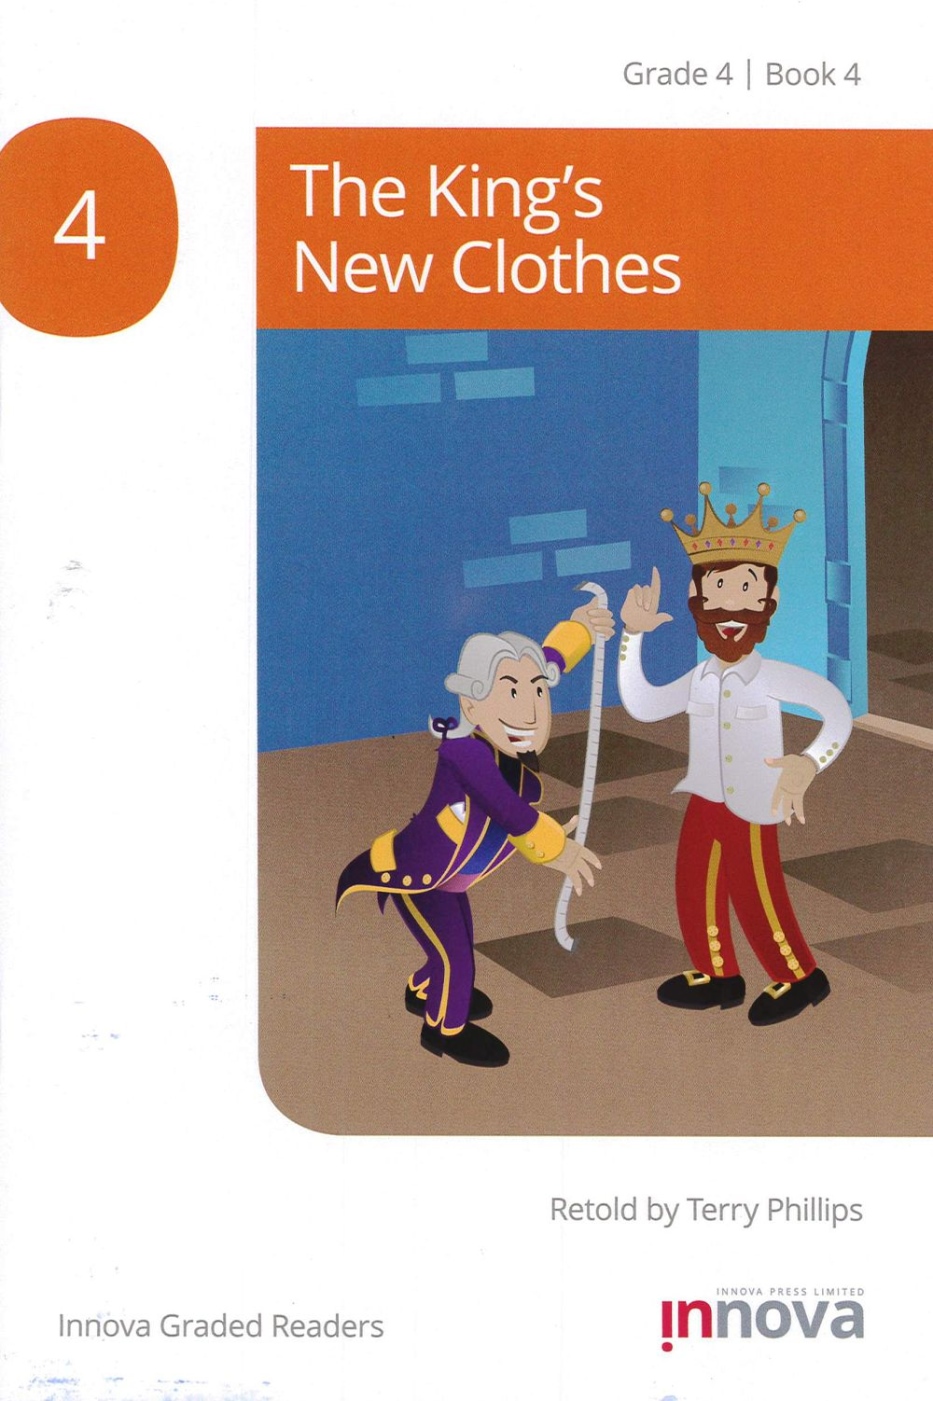 Innova Graded Readers Grade 4 (Book 4) :The King’s New Clothes